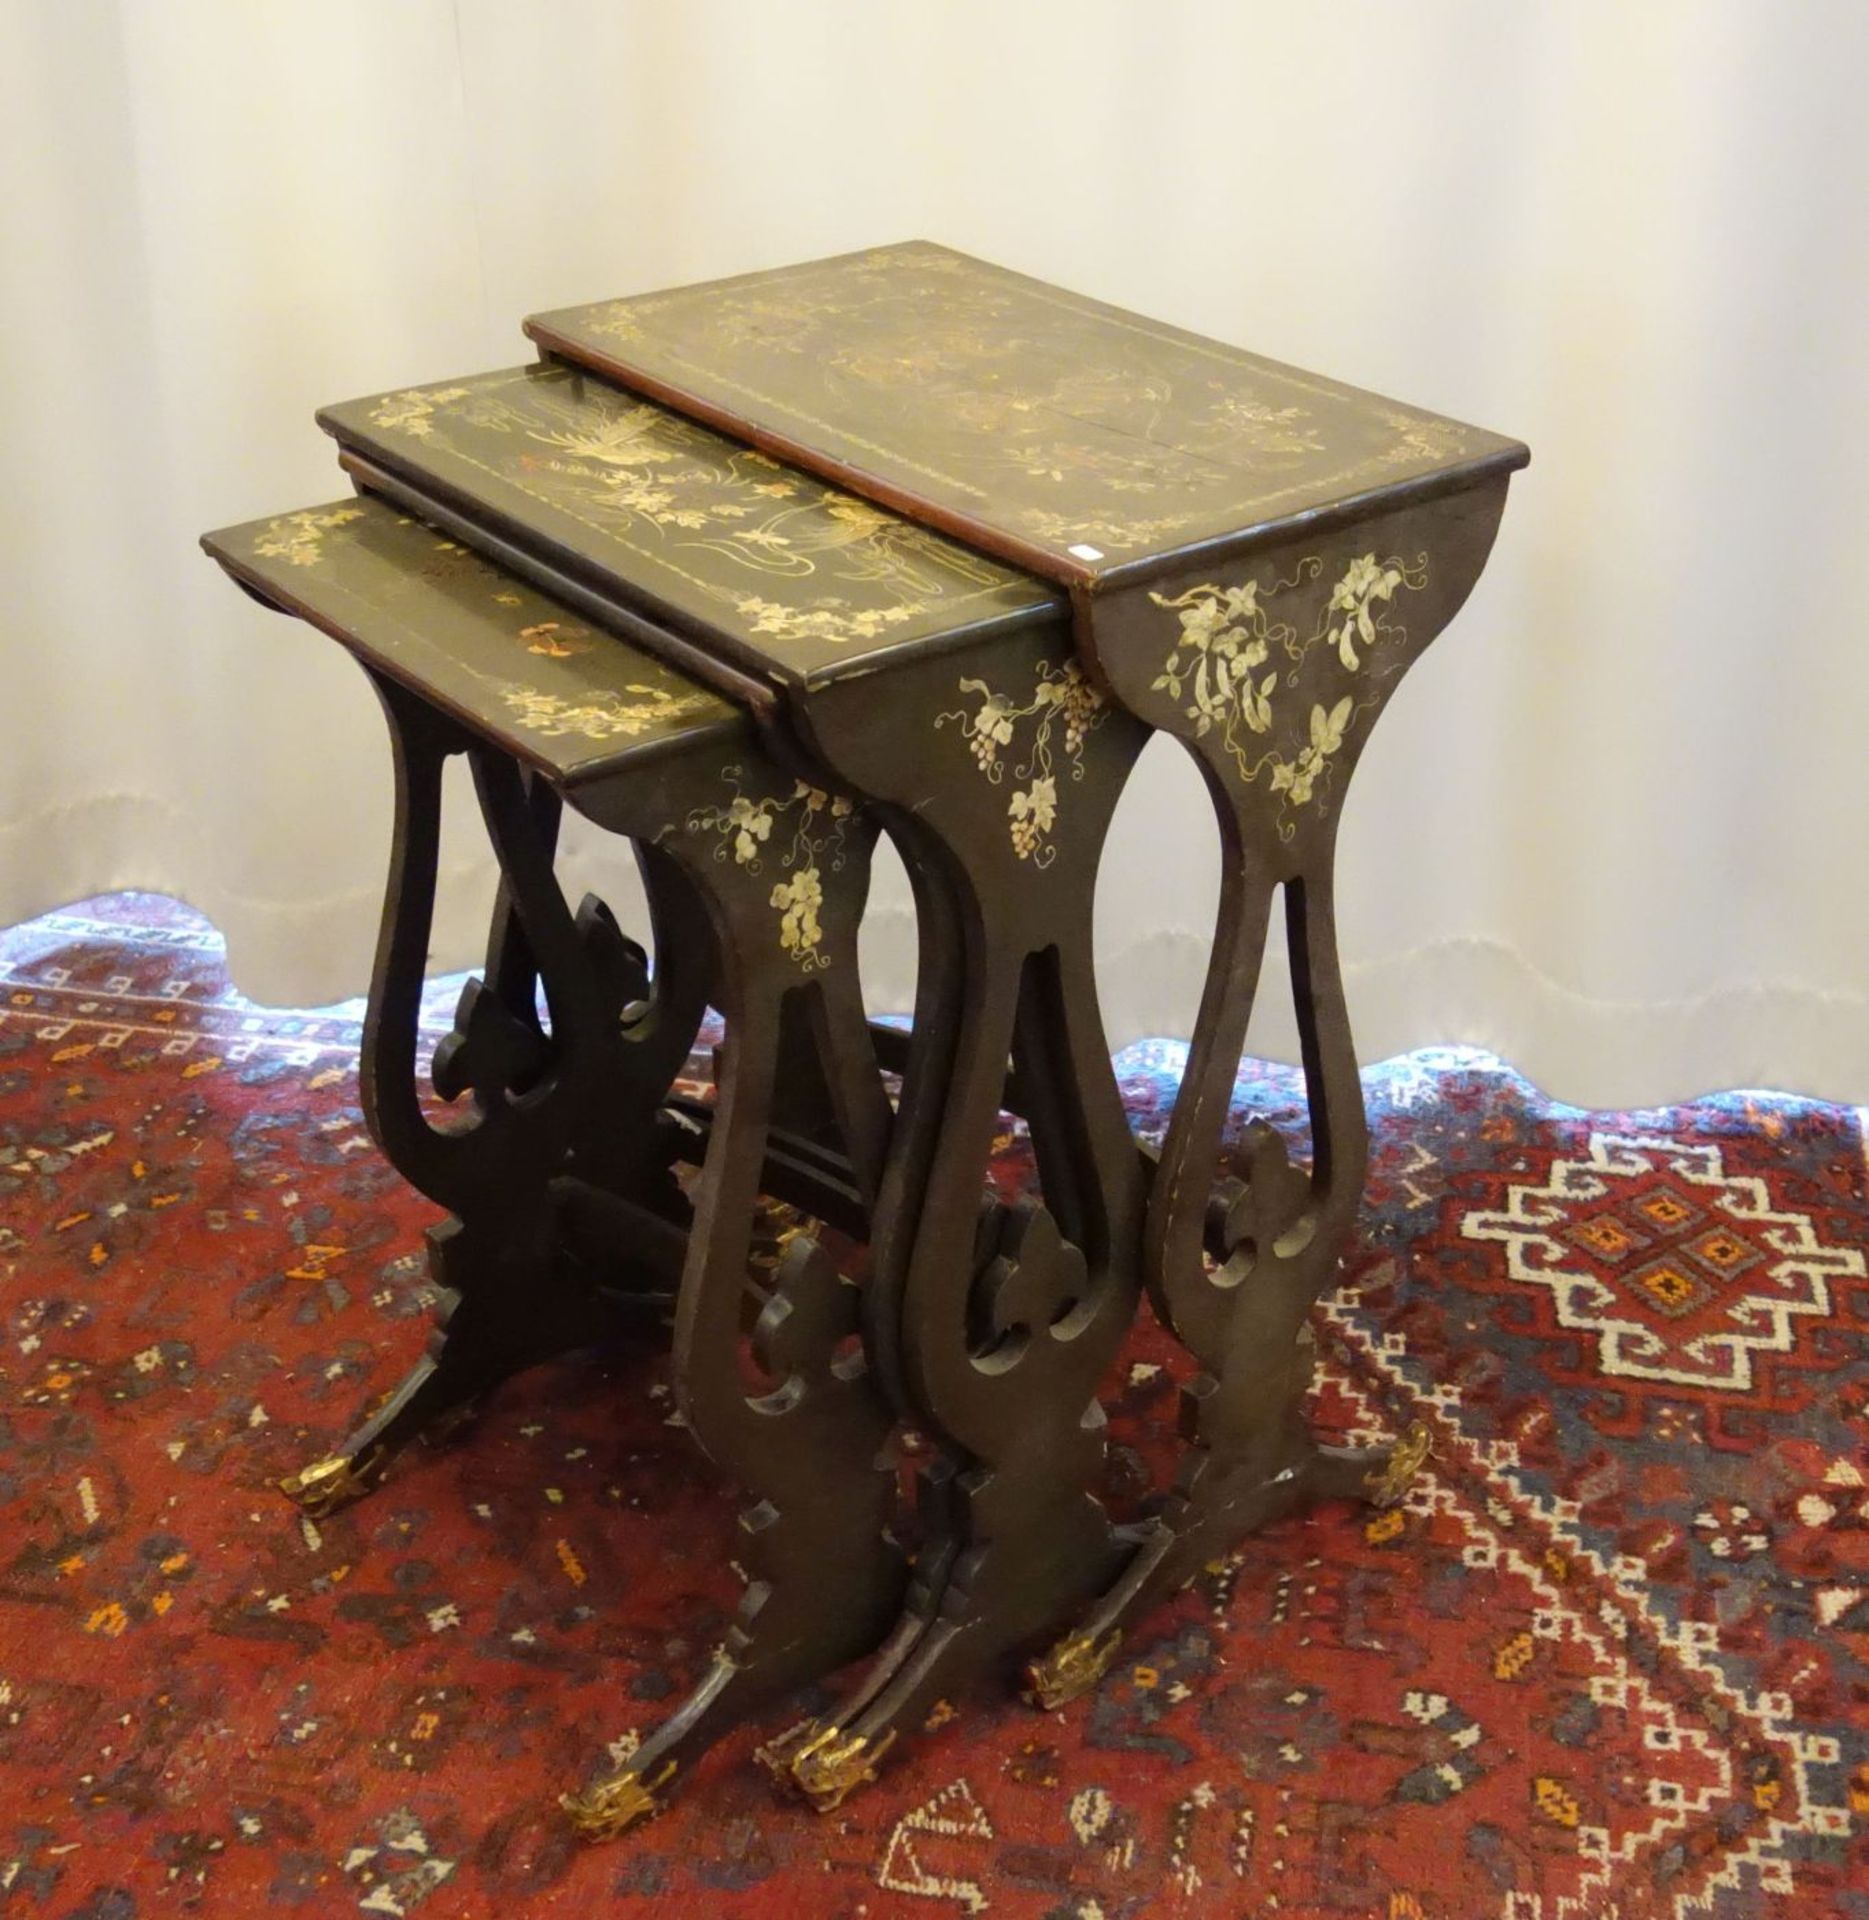 4 CHINOISE SIDE TABLES